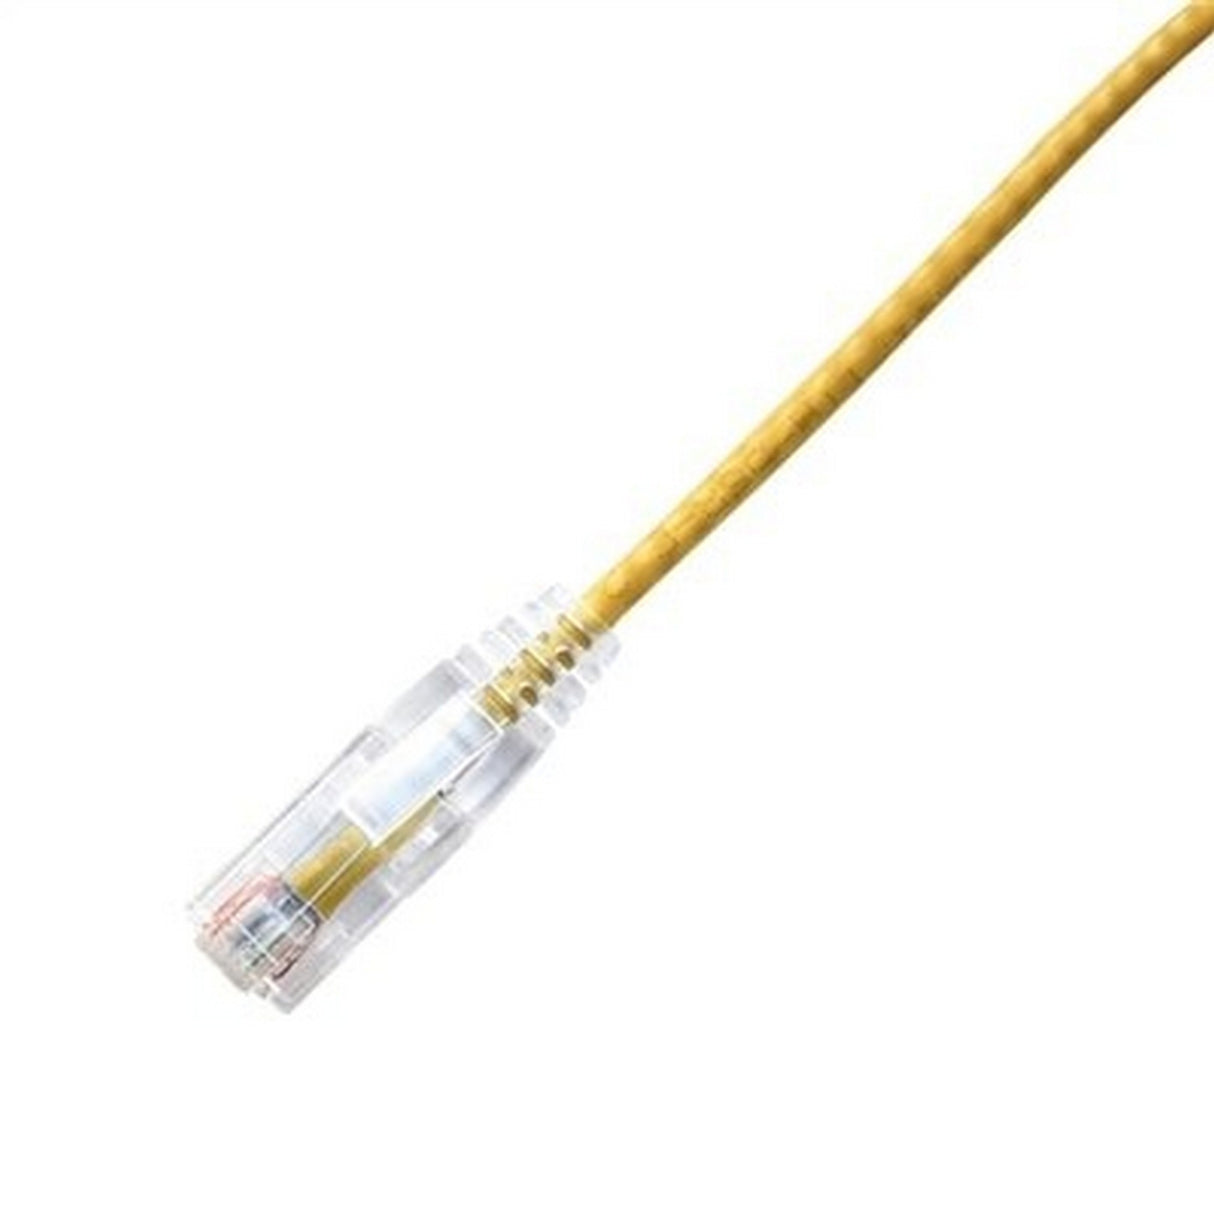 LYNN CPCS-AYE-025F CHOICE Slim 28AWG CAT6A Ethernet Patch Cable, 25-Foot, Yellow